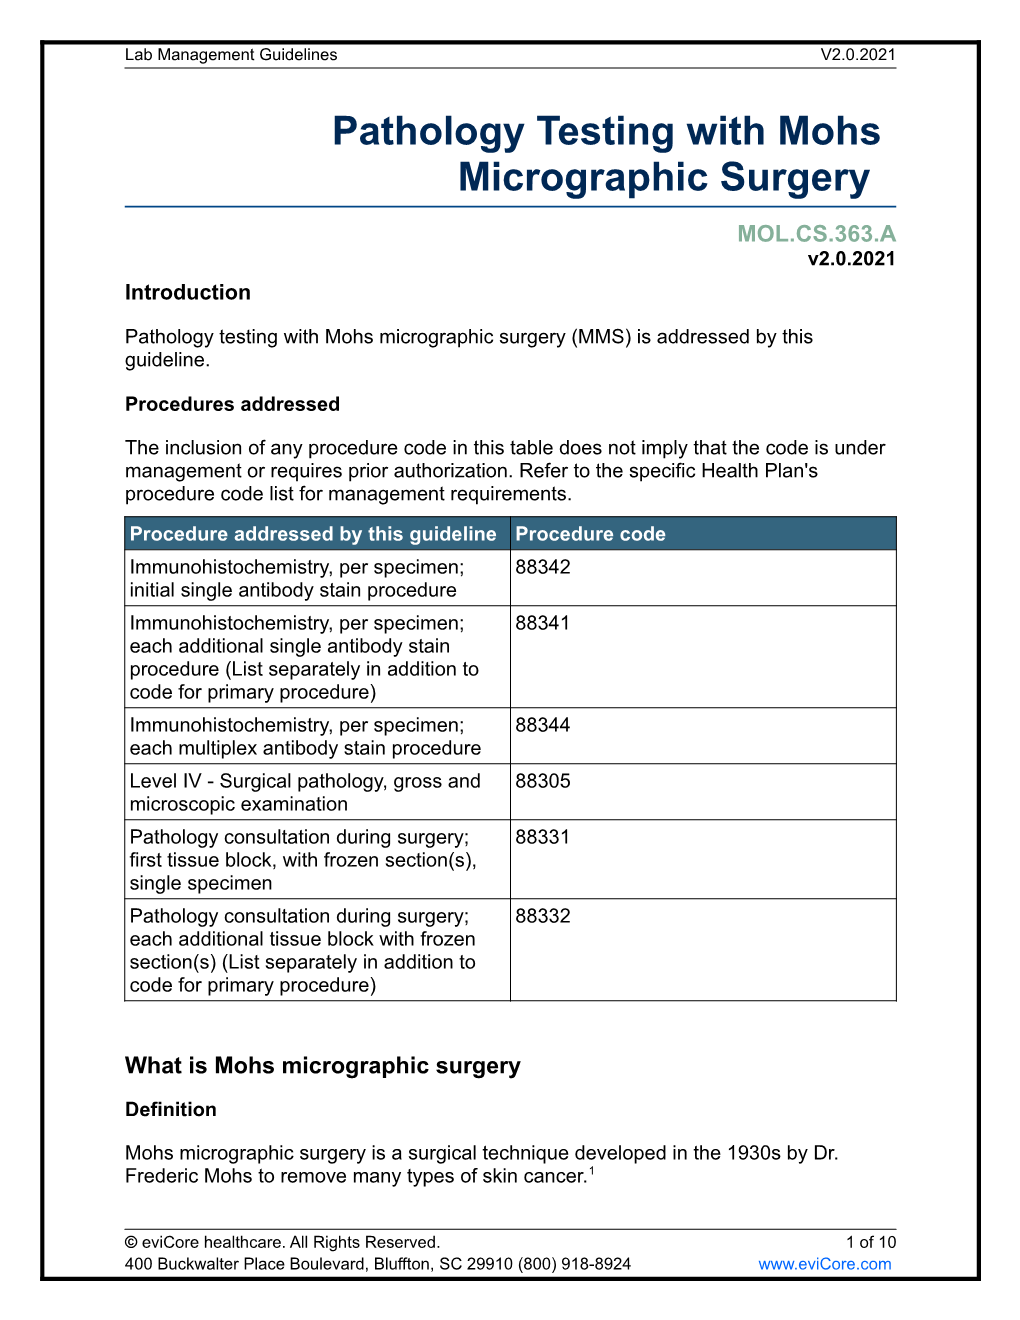 Pathology Testing with Mohs Micrographic Surgery